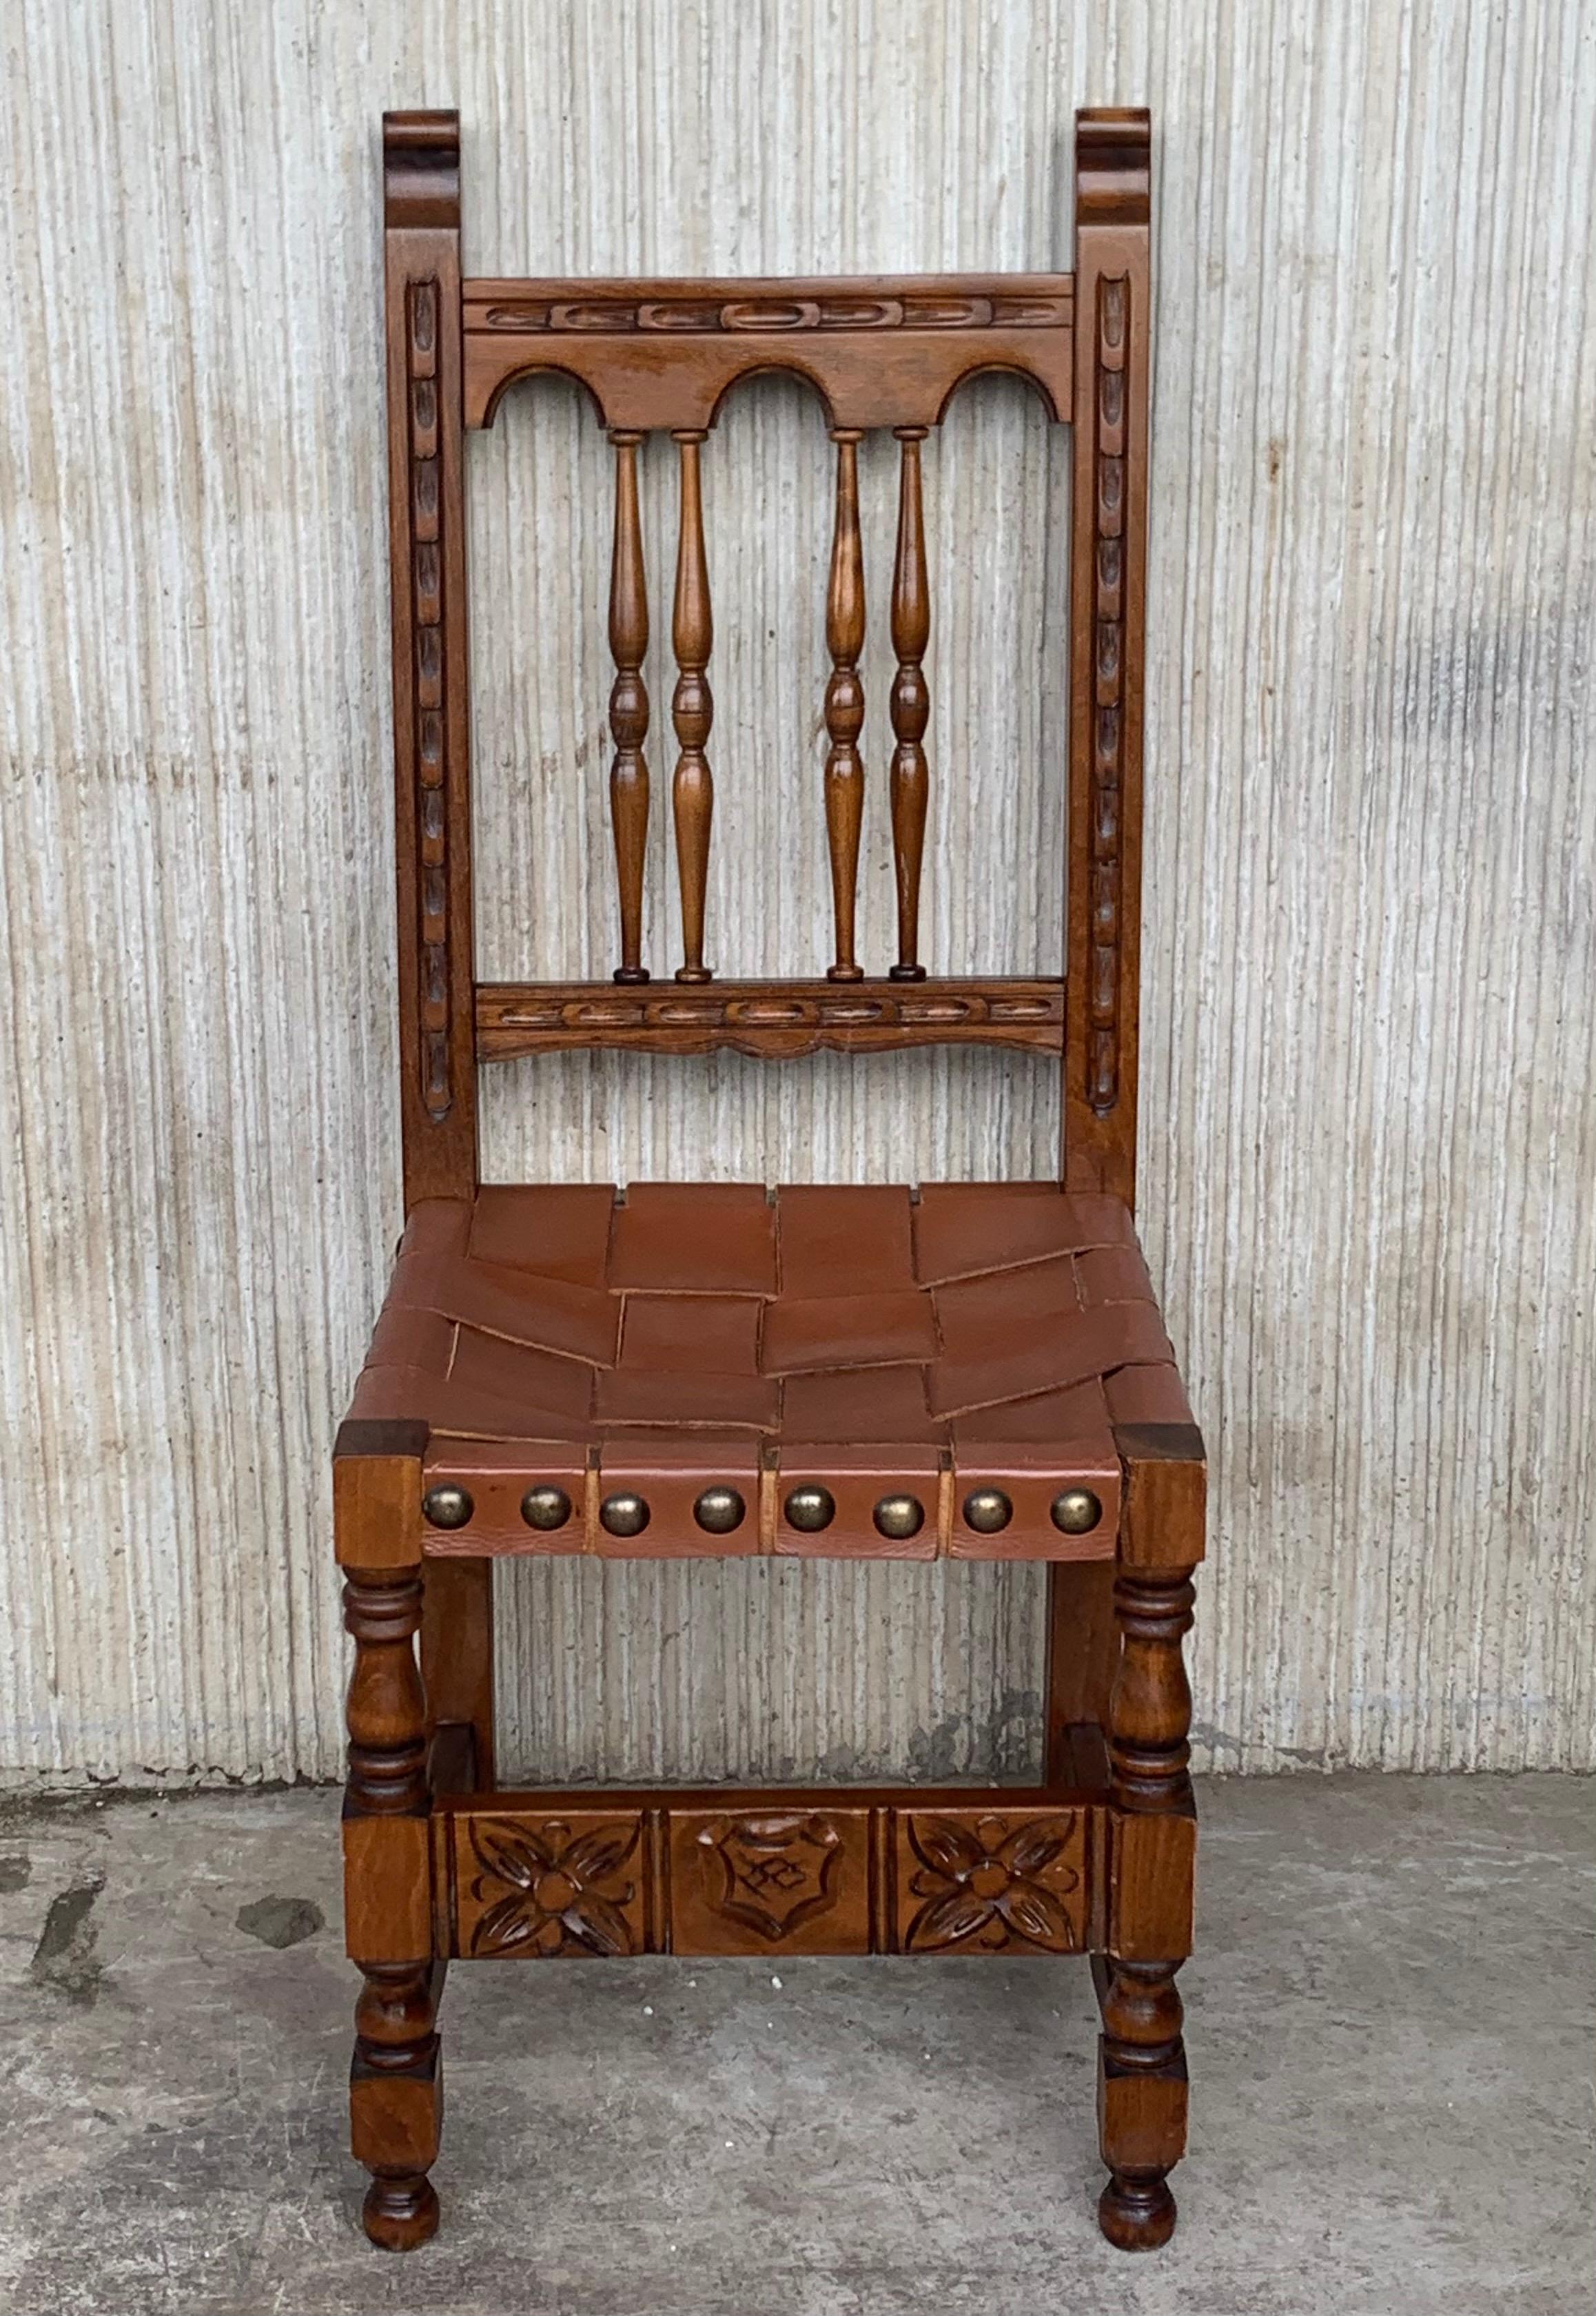 A set of 4 Spanish chairs with leather sling seatsand backs on oak and sycamore frames with hand carved decoration. These chairs are true to the Spanish character and each features carvings that employ typical Spanish elements. The leather sling